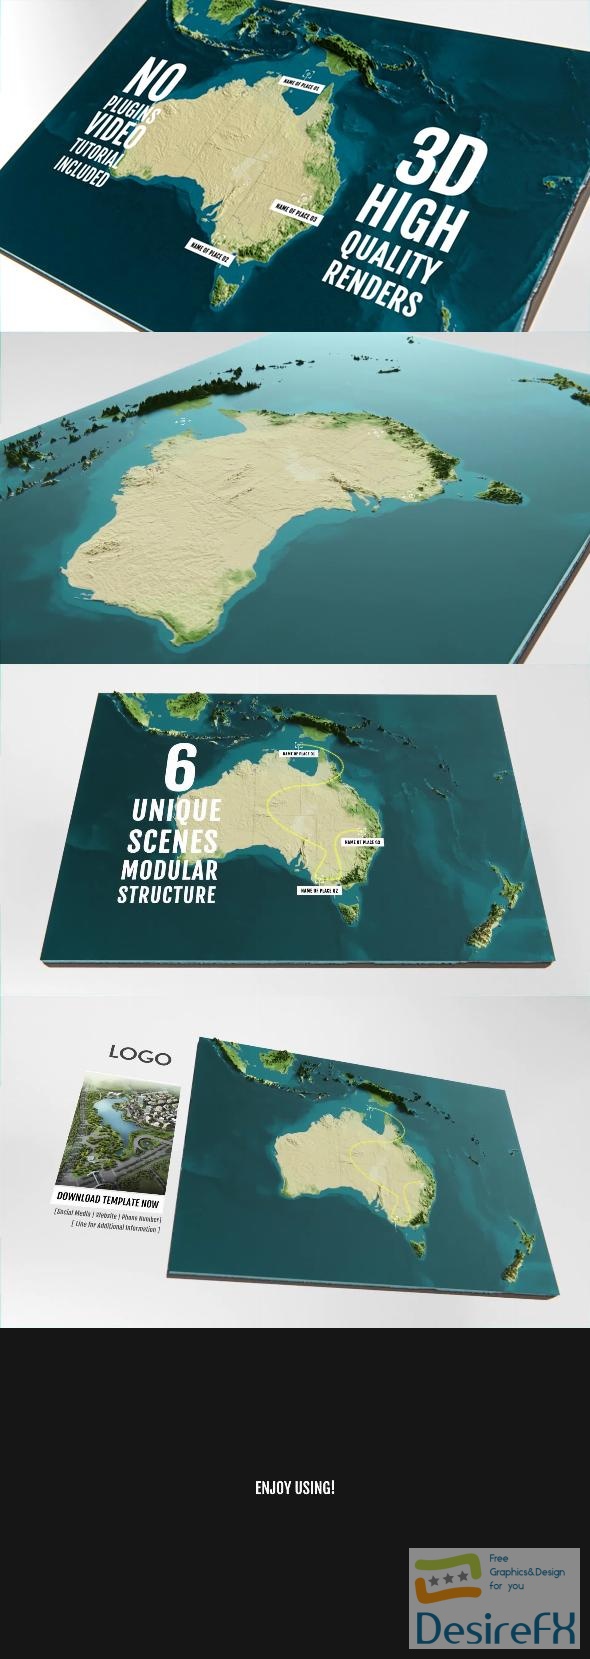 VideoHive 3D Physical Map - Australia and Oceania 44742052